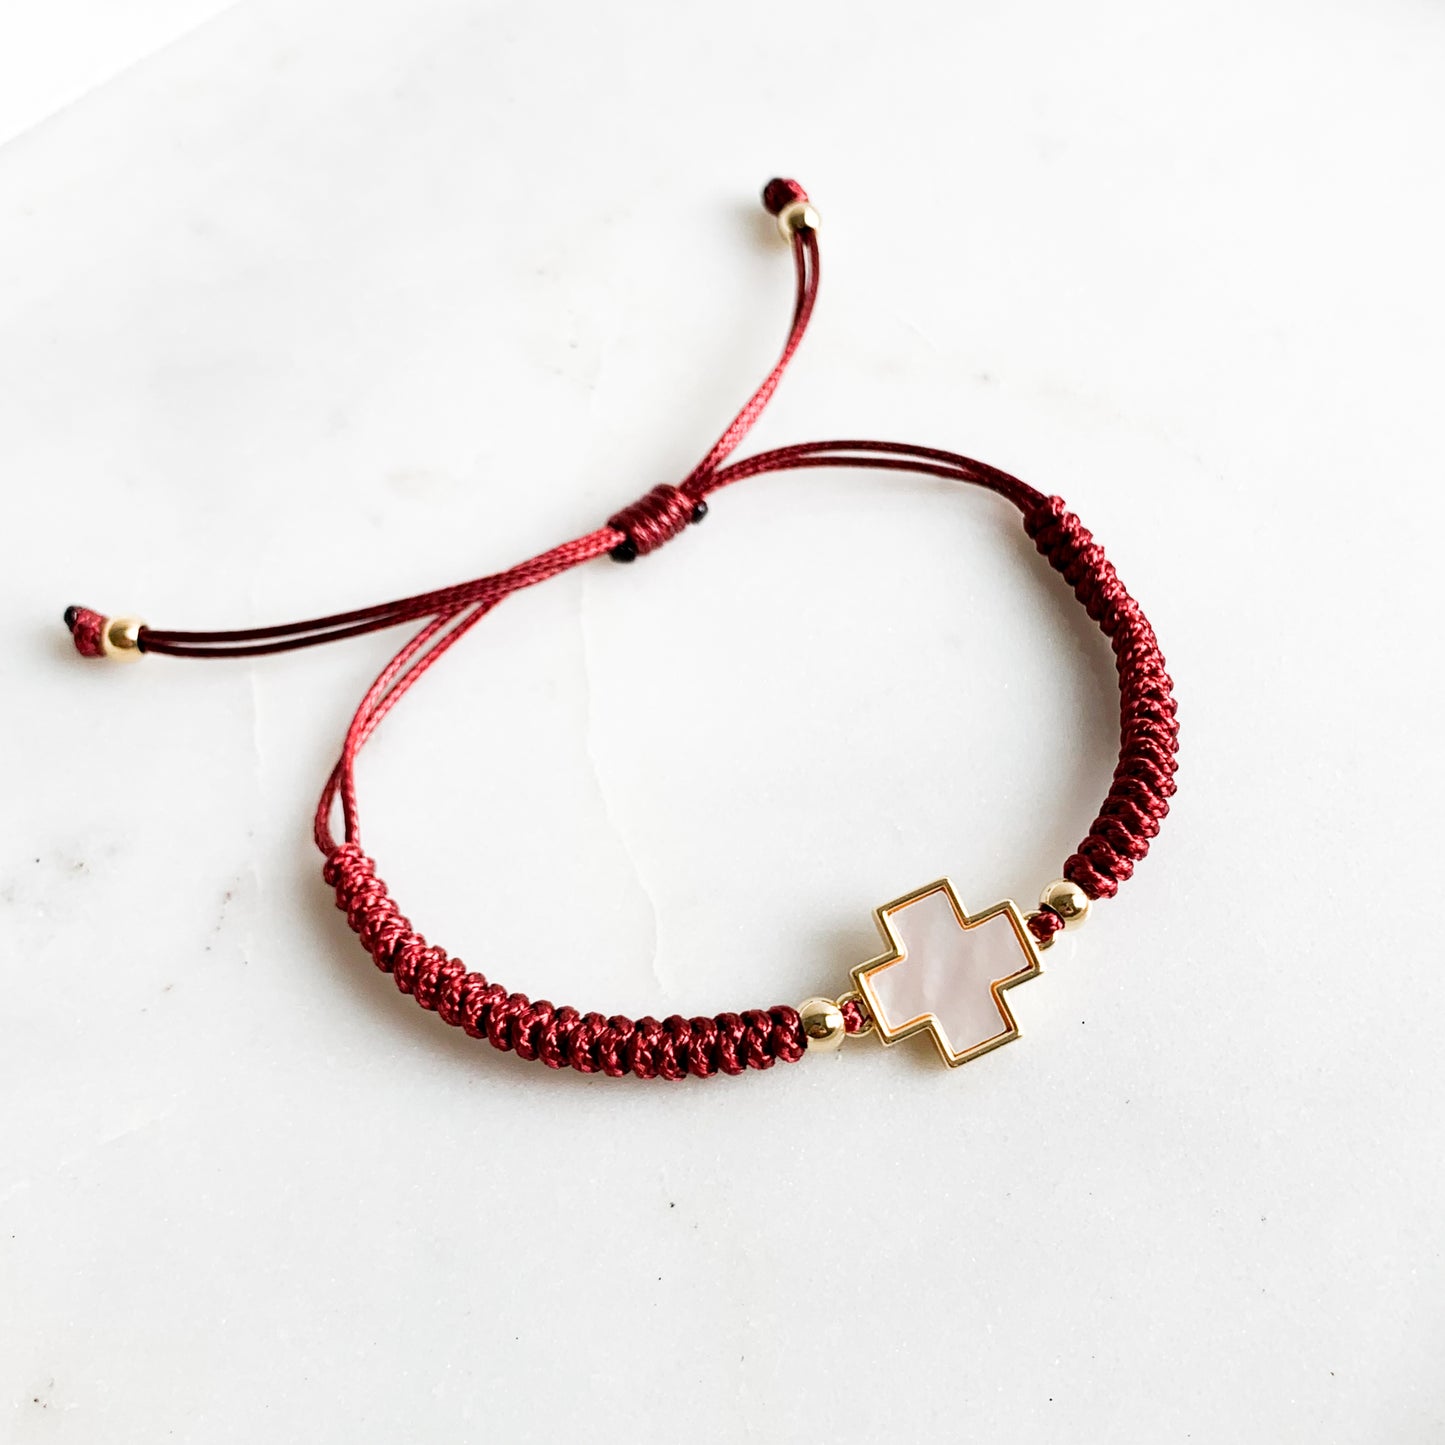 Mother of Pearl Square Cross Cord Bracelet